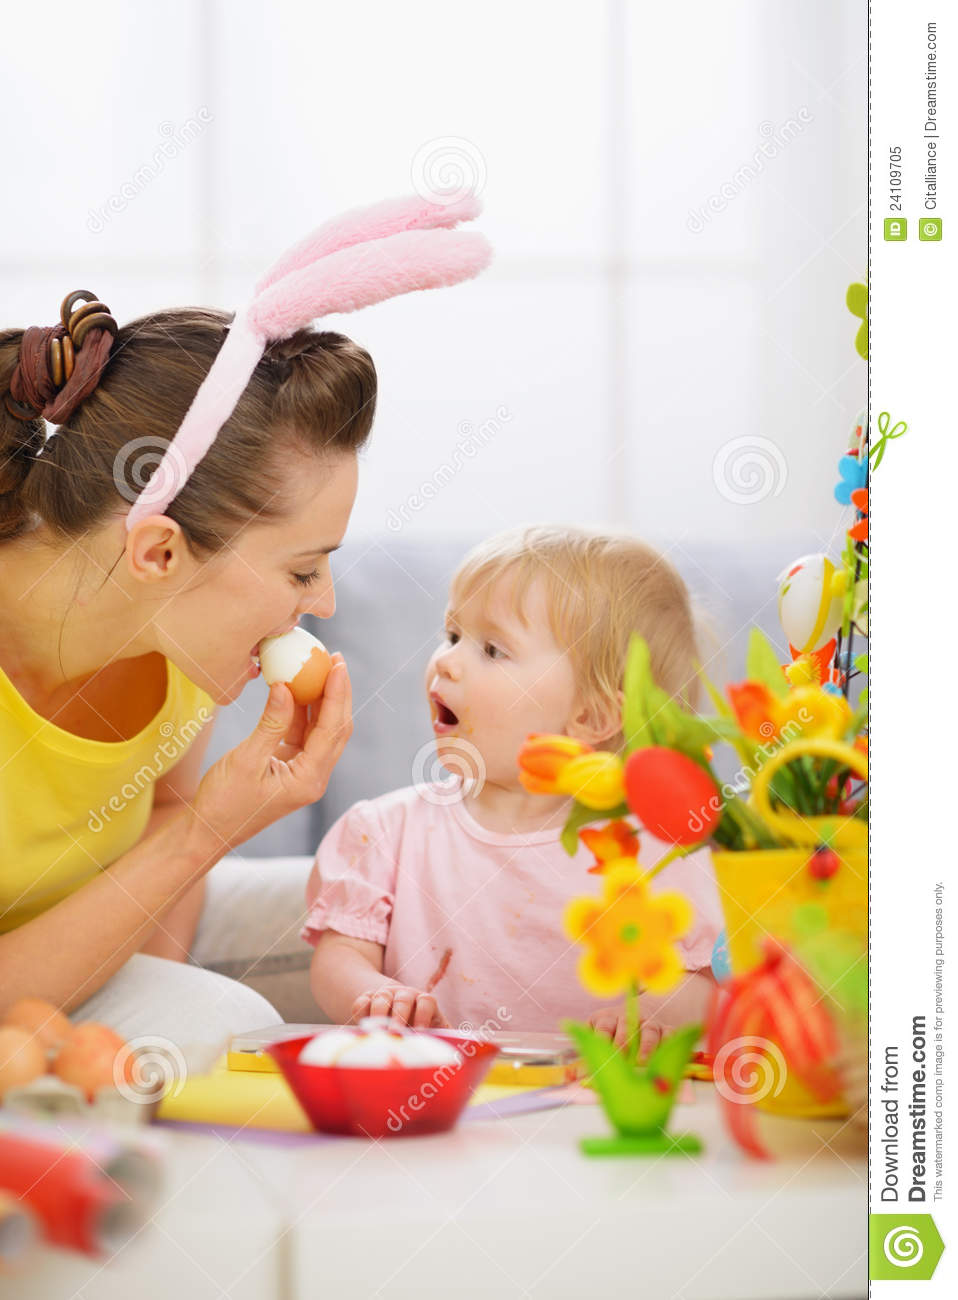 Mother And Baby Eating Easter Egg Royalty Free Stock Photo   Image